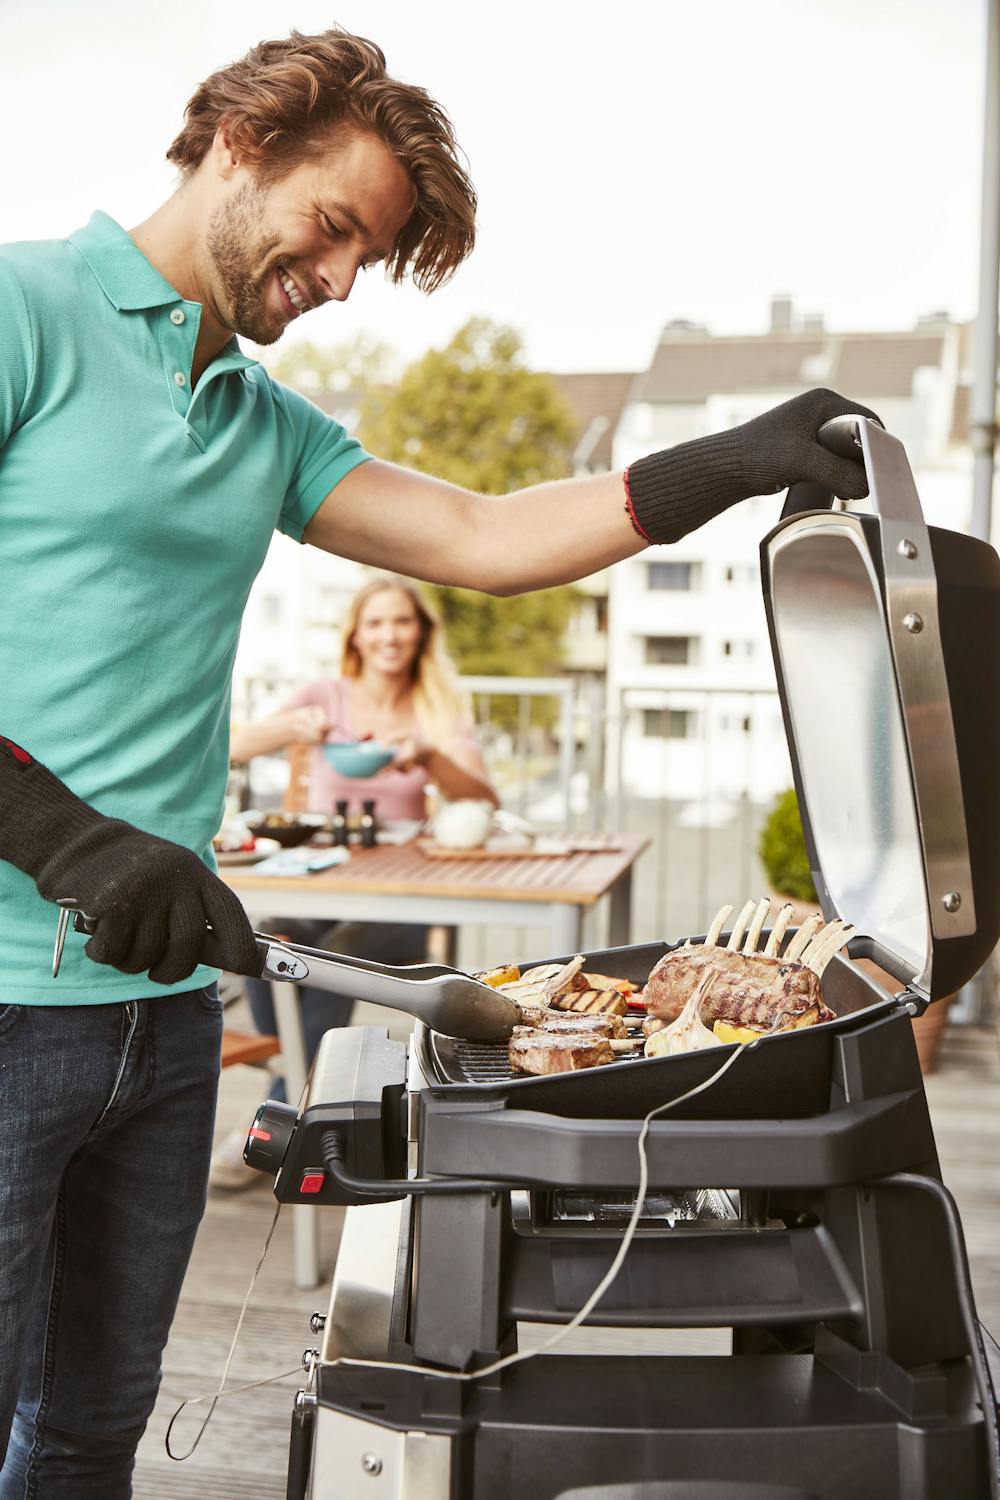 https://content-images.weber.com/content/blog/Grill-On/The-electric-grill-revolution/84010004Y16.jpg?auto=compress,format&w=1000&fit=clip